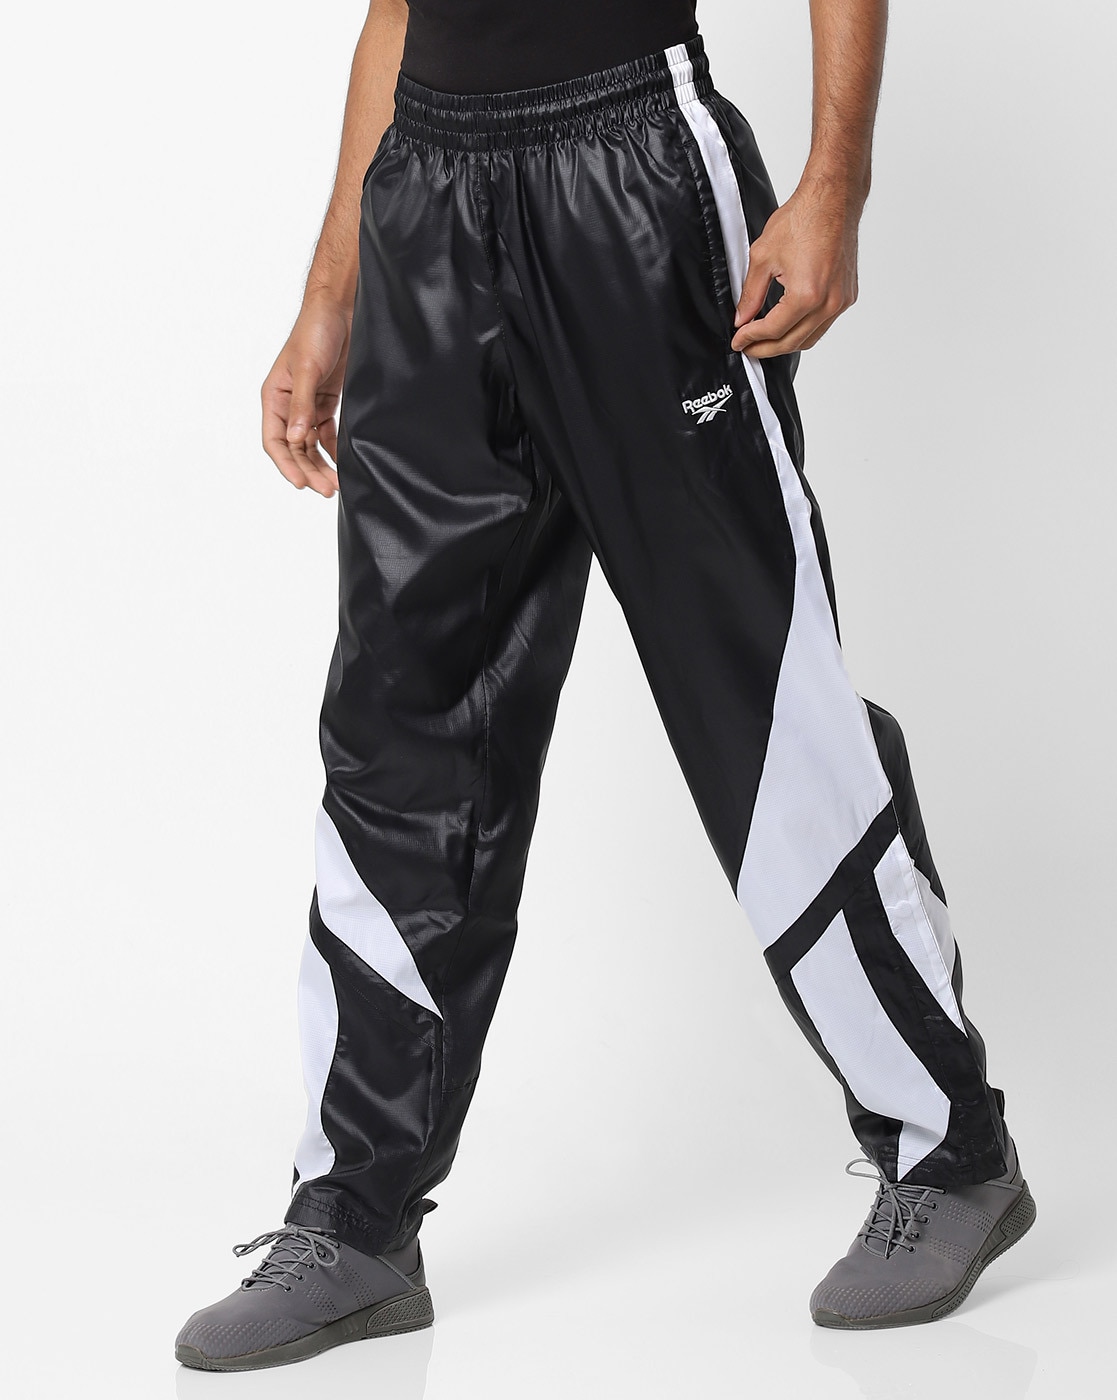 Reebok Classics Unisex 100 Recycled Polyamide CL F FR Trackpant Casual Track  Pant NGHBLKNGHBLK XS  Amazonin Clothing  Accessories